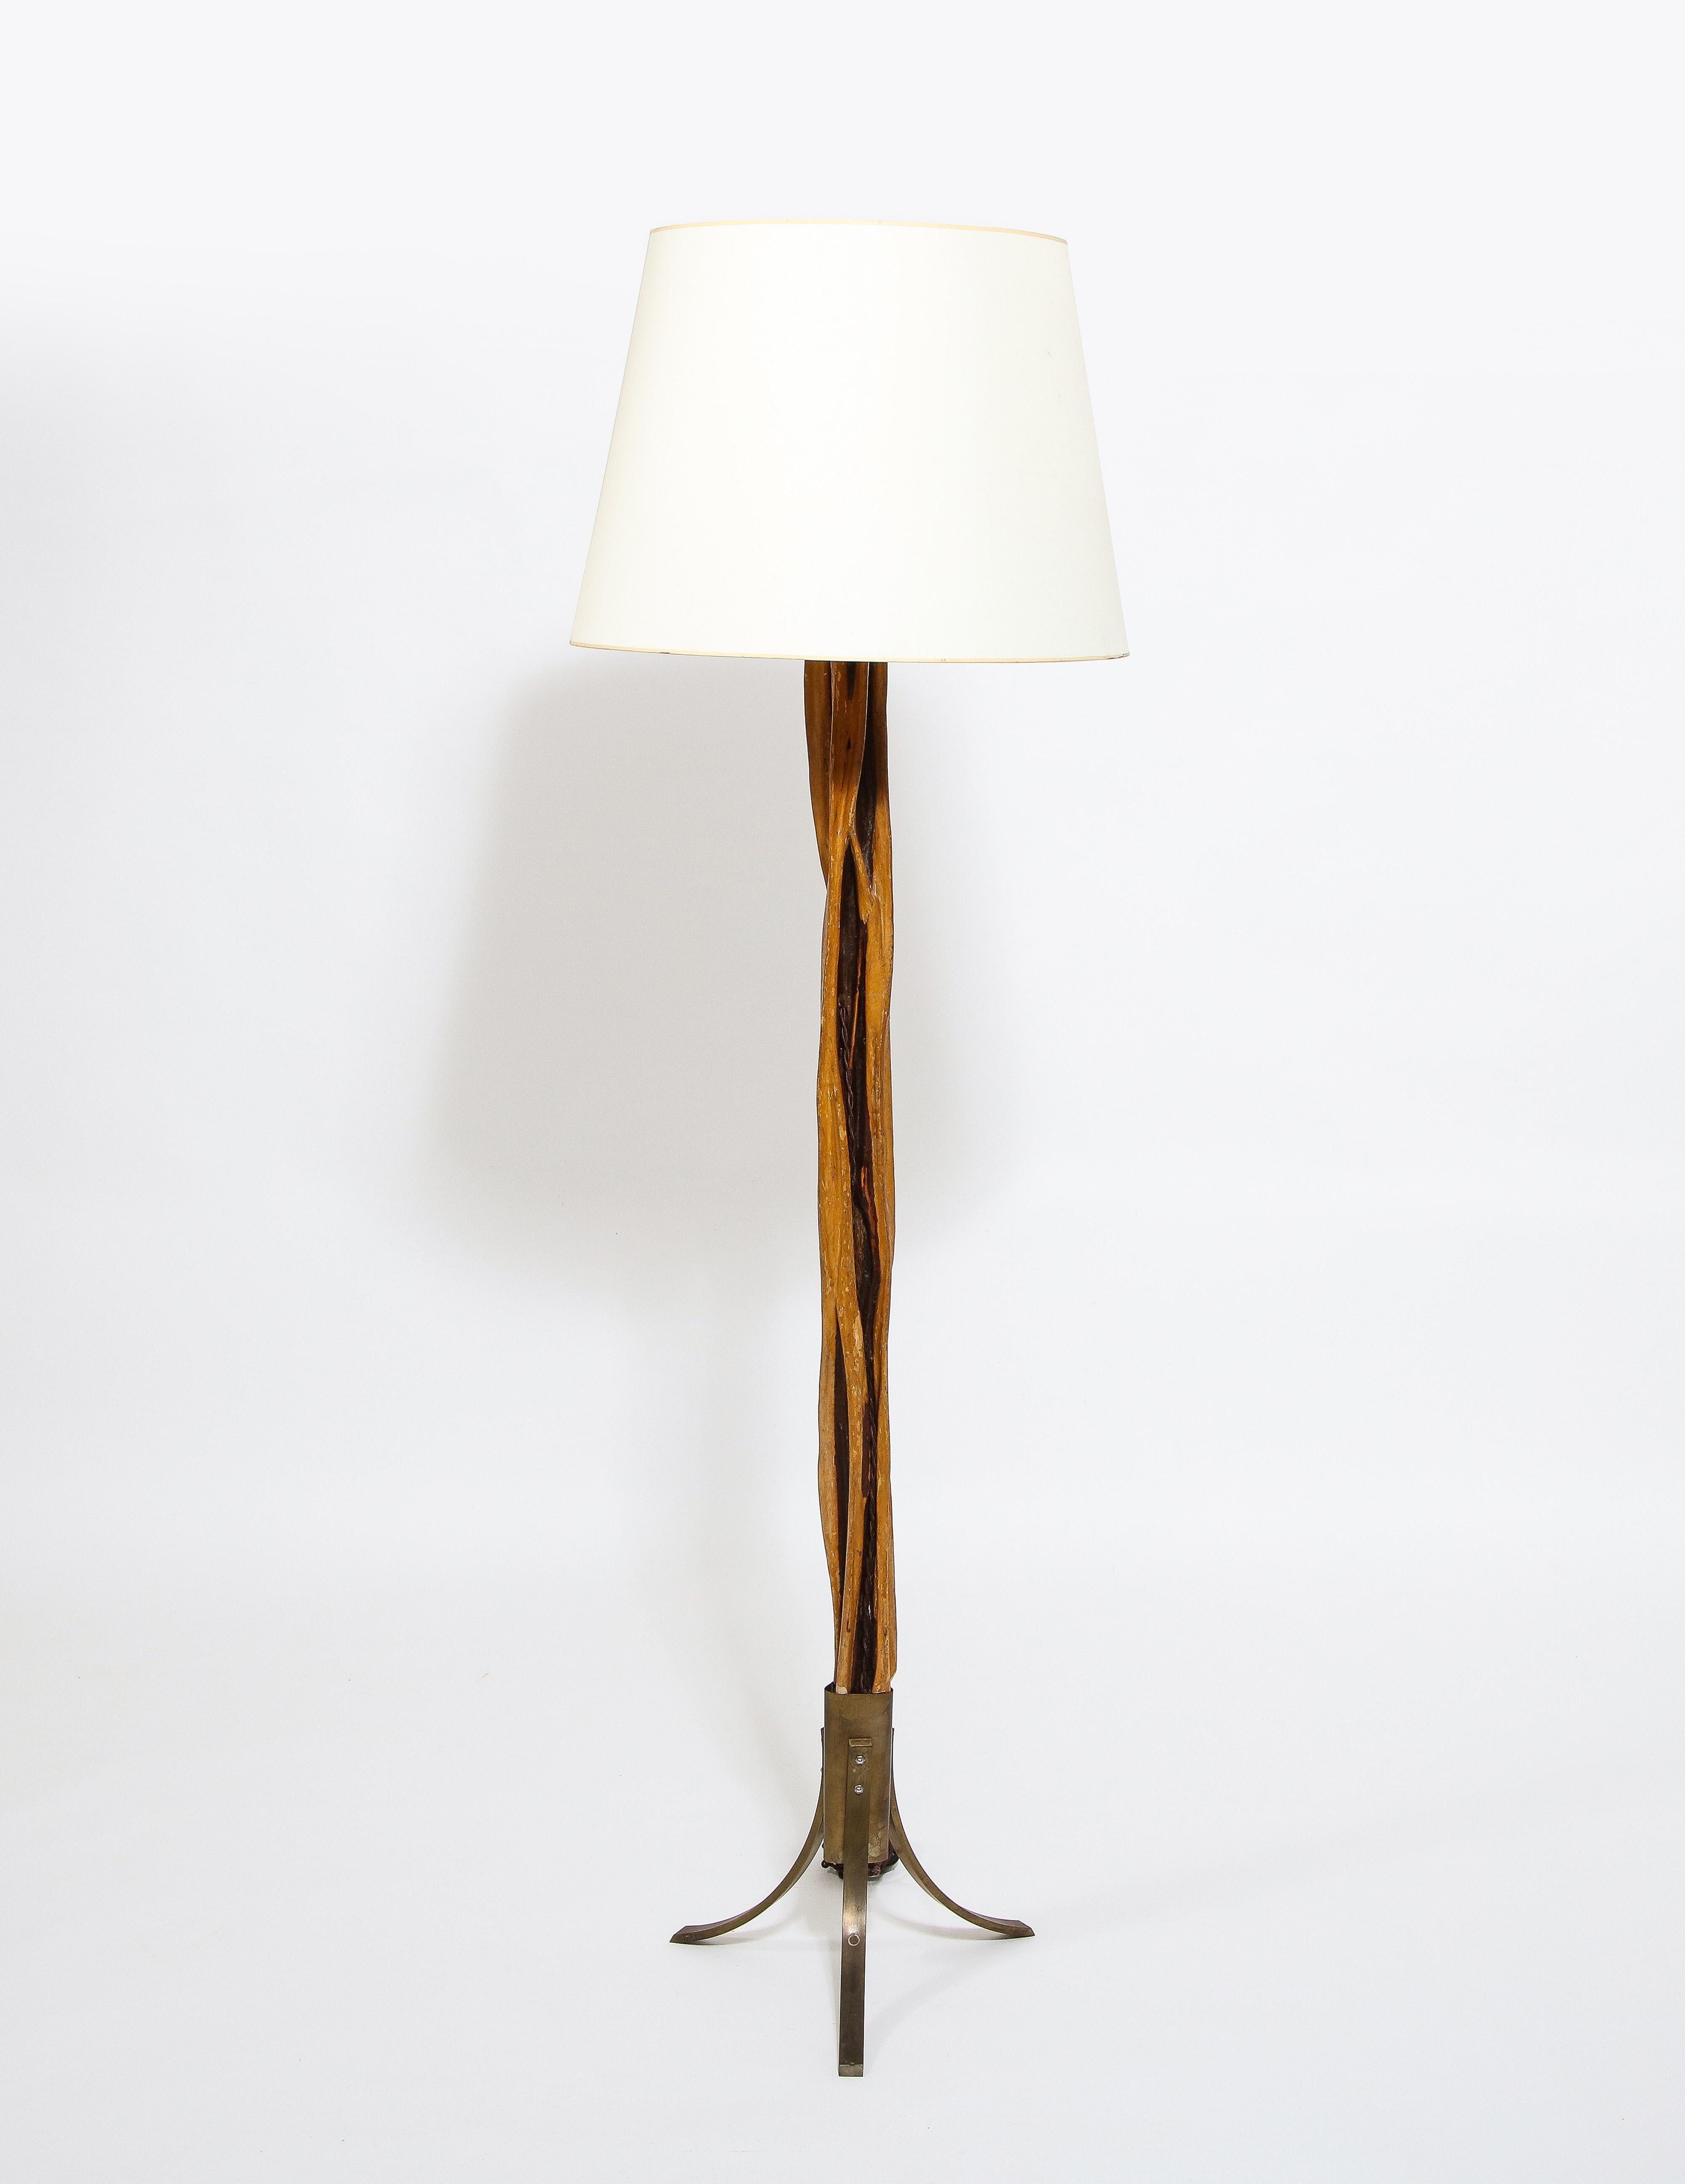 Natural Wood and Brass Floor Lamp, France 1960's For Sale 1